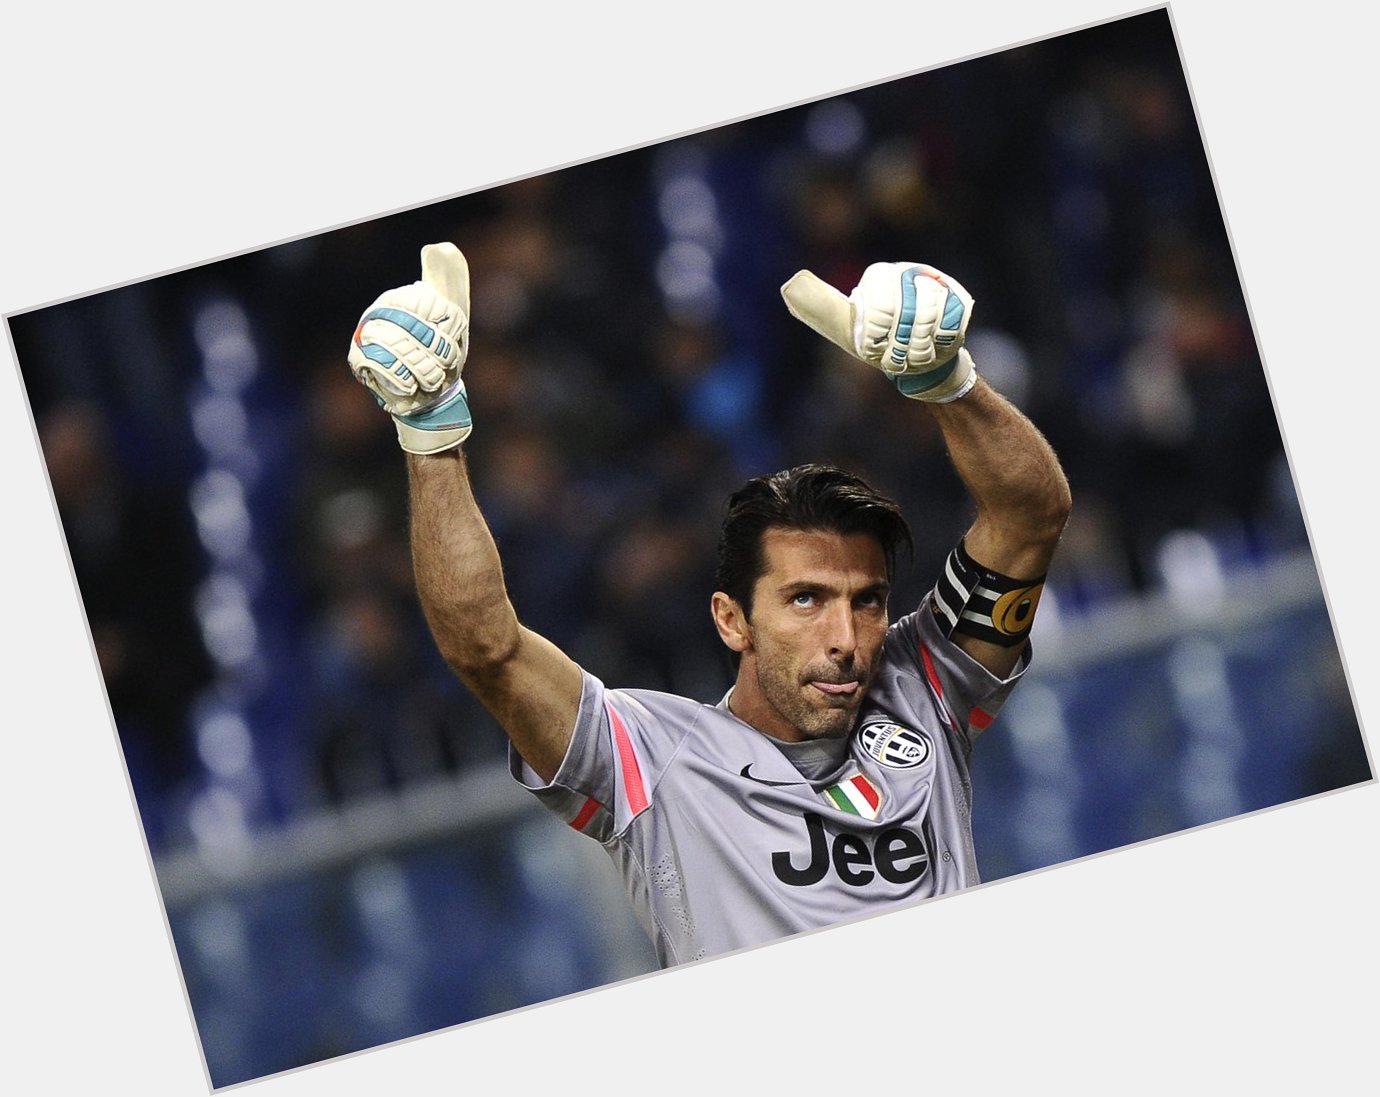 Happy 37th birthday to Gianluigi Buffon, one of the greatest goalkeepers of all time! 